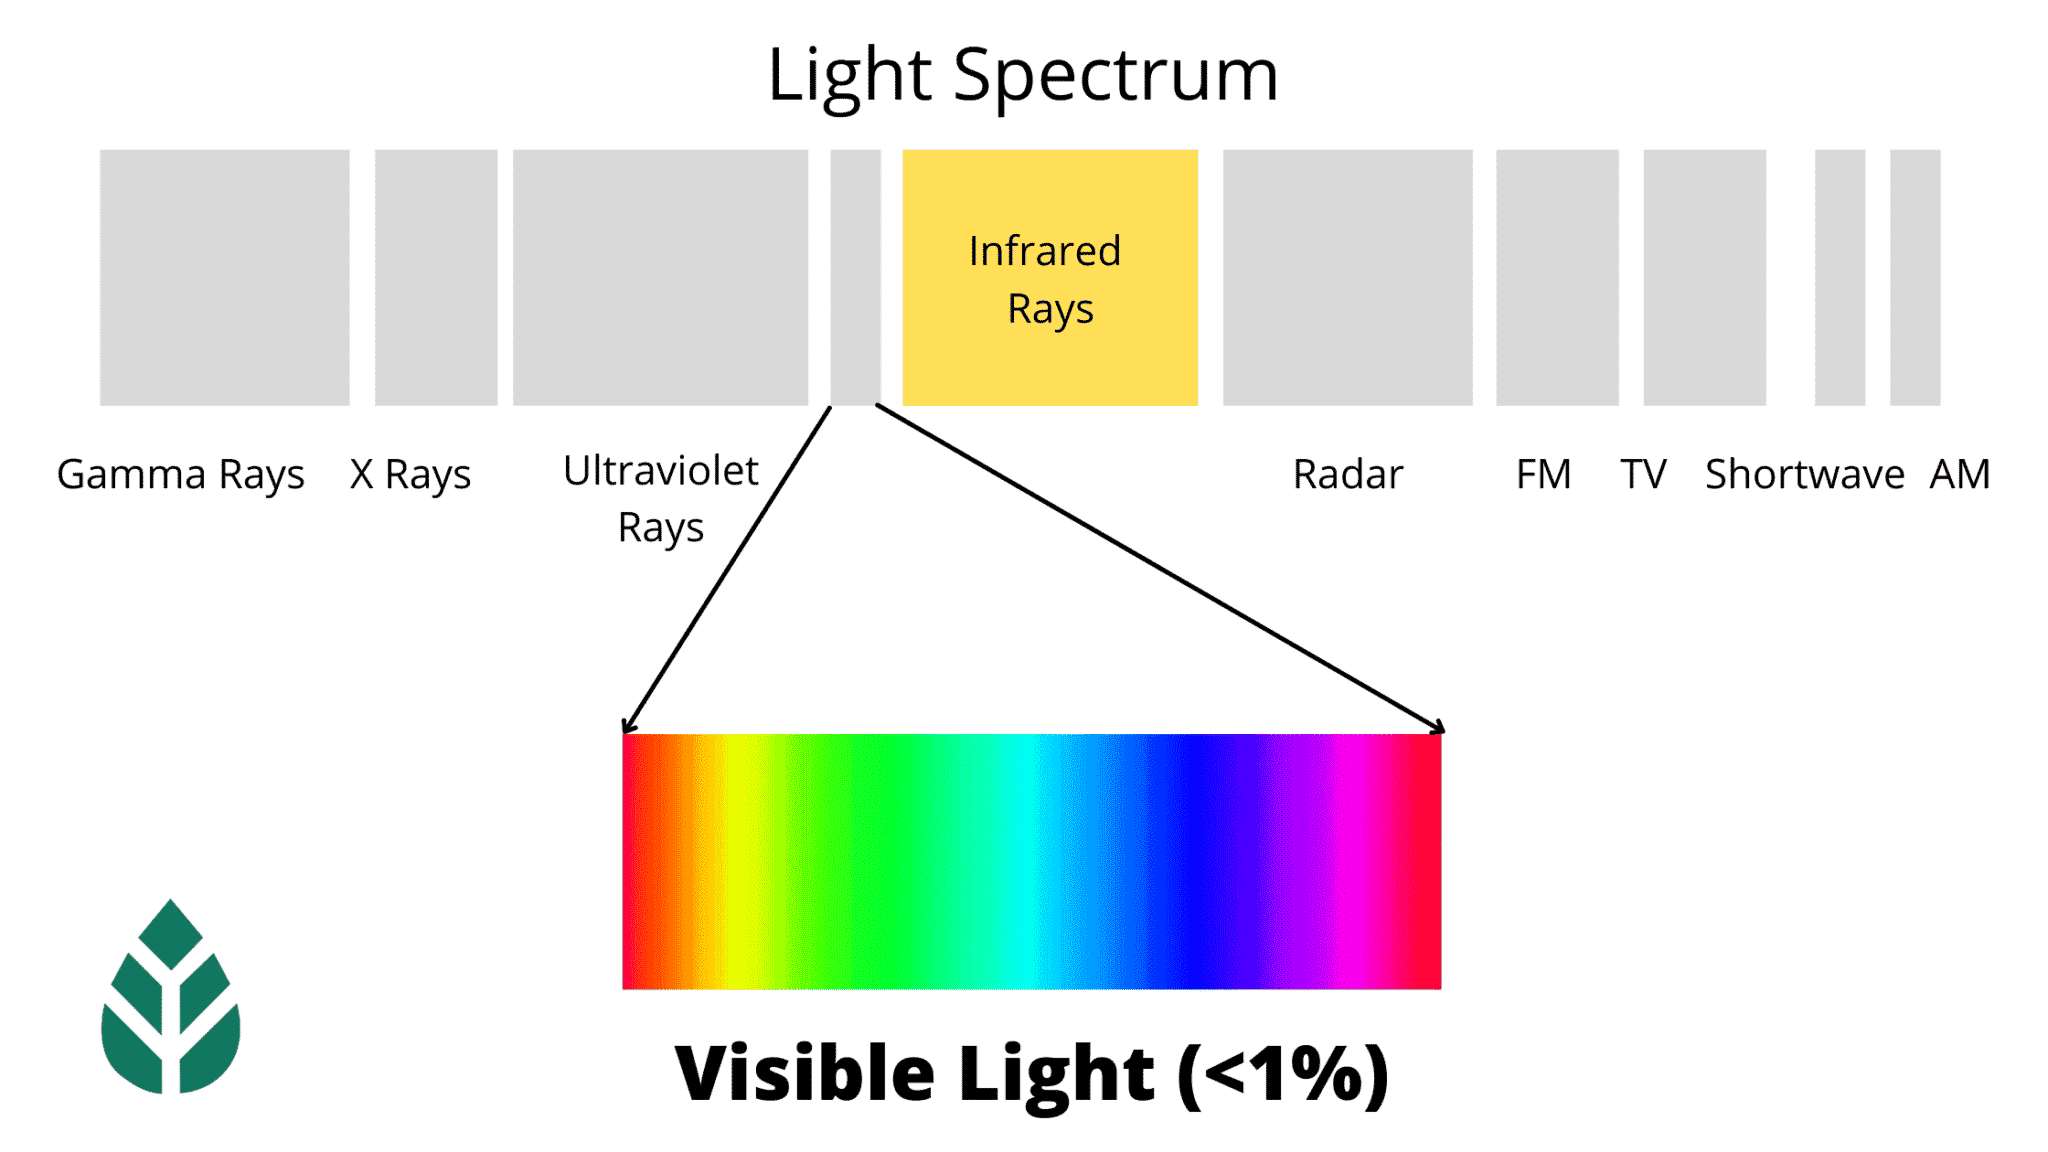 Light spectrum with visible light scale shown in color and infrared rays section highlighted.